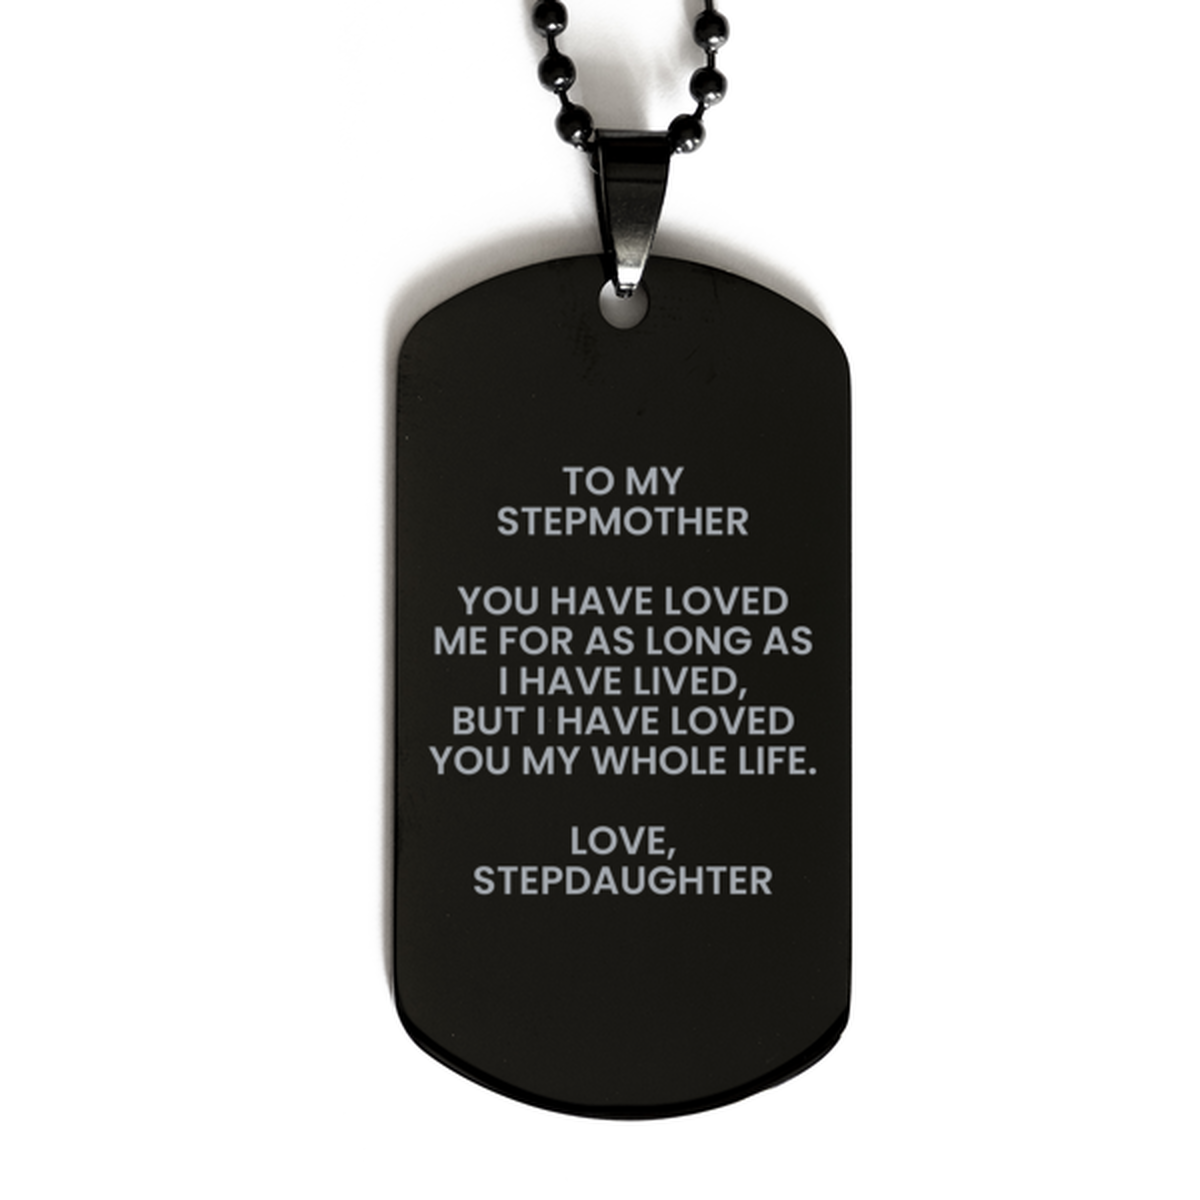 To My Stepmother Black Dog Tag, Loved You My Whole Life, Mothers Day Gifts For Stepmother From Stepdaughter, Birthday Gifts For Women